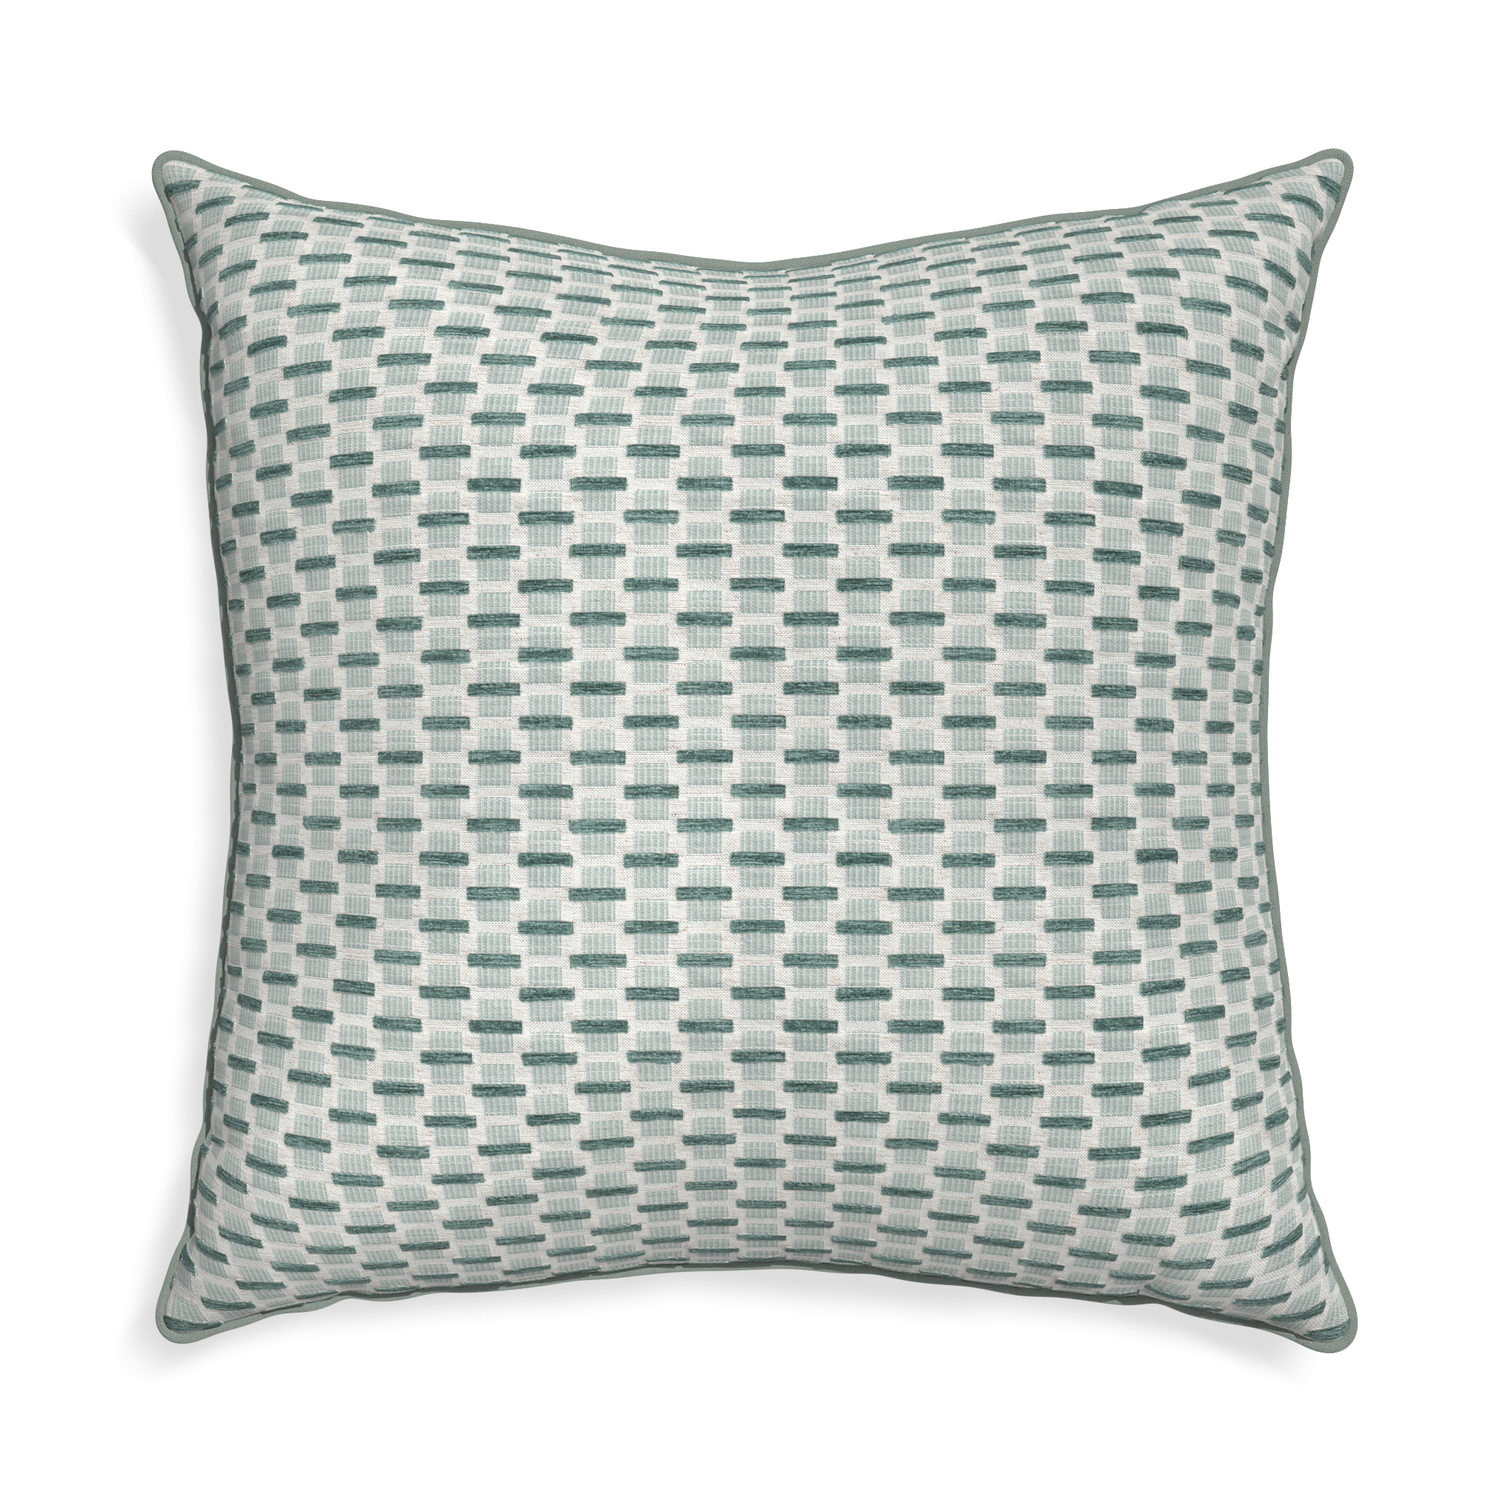 Euro-sham willow mint custom green geometric chenillepillow with sage piping on white background